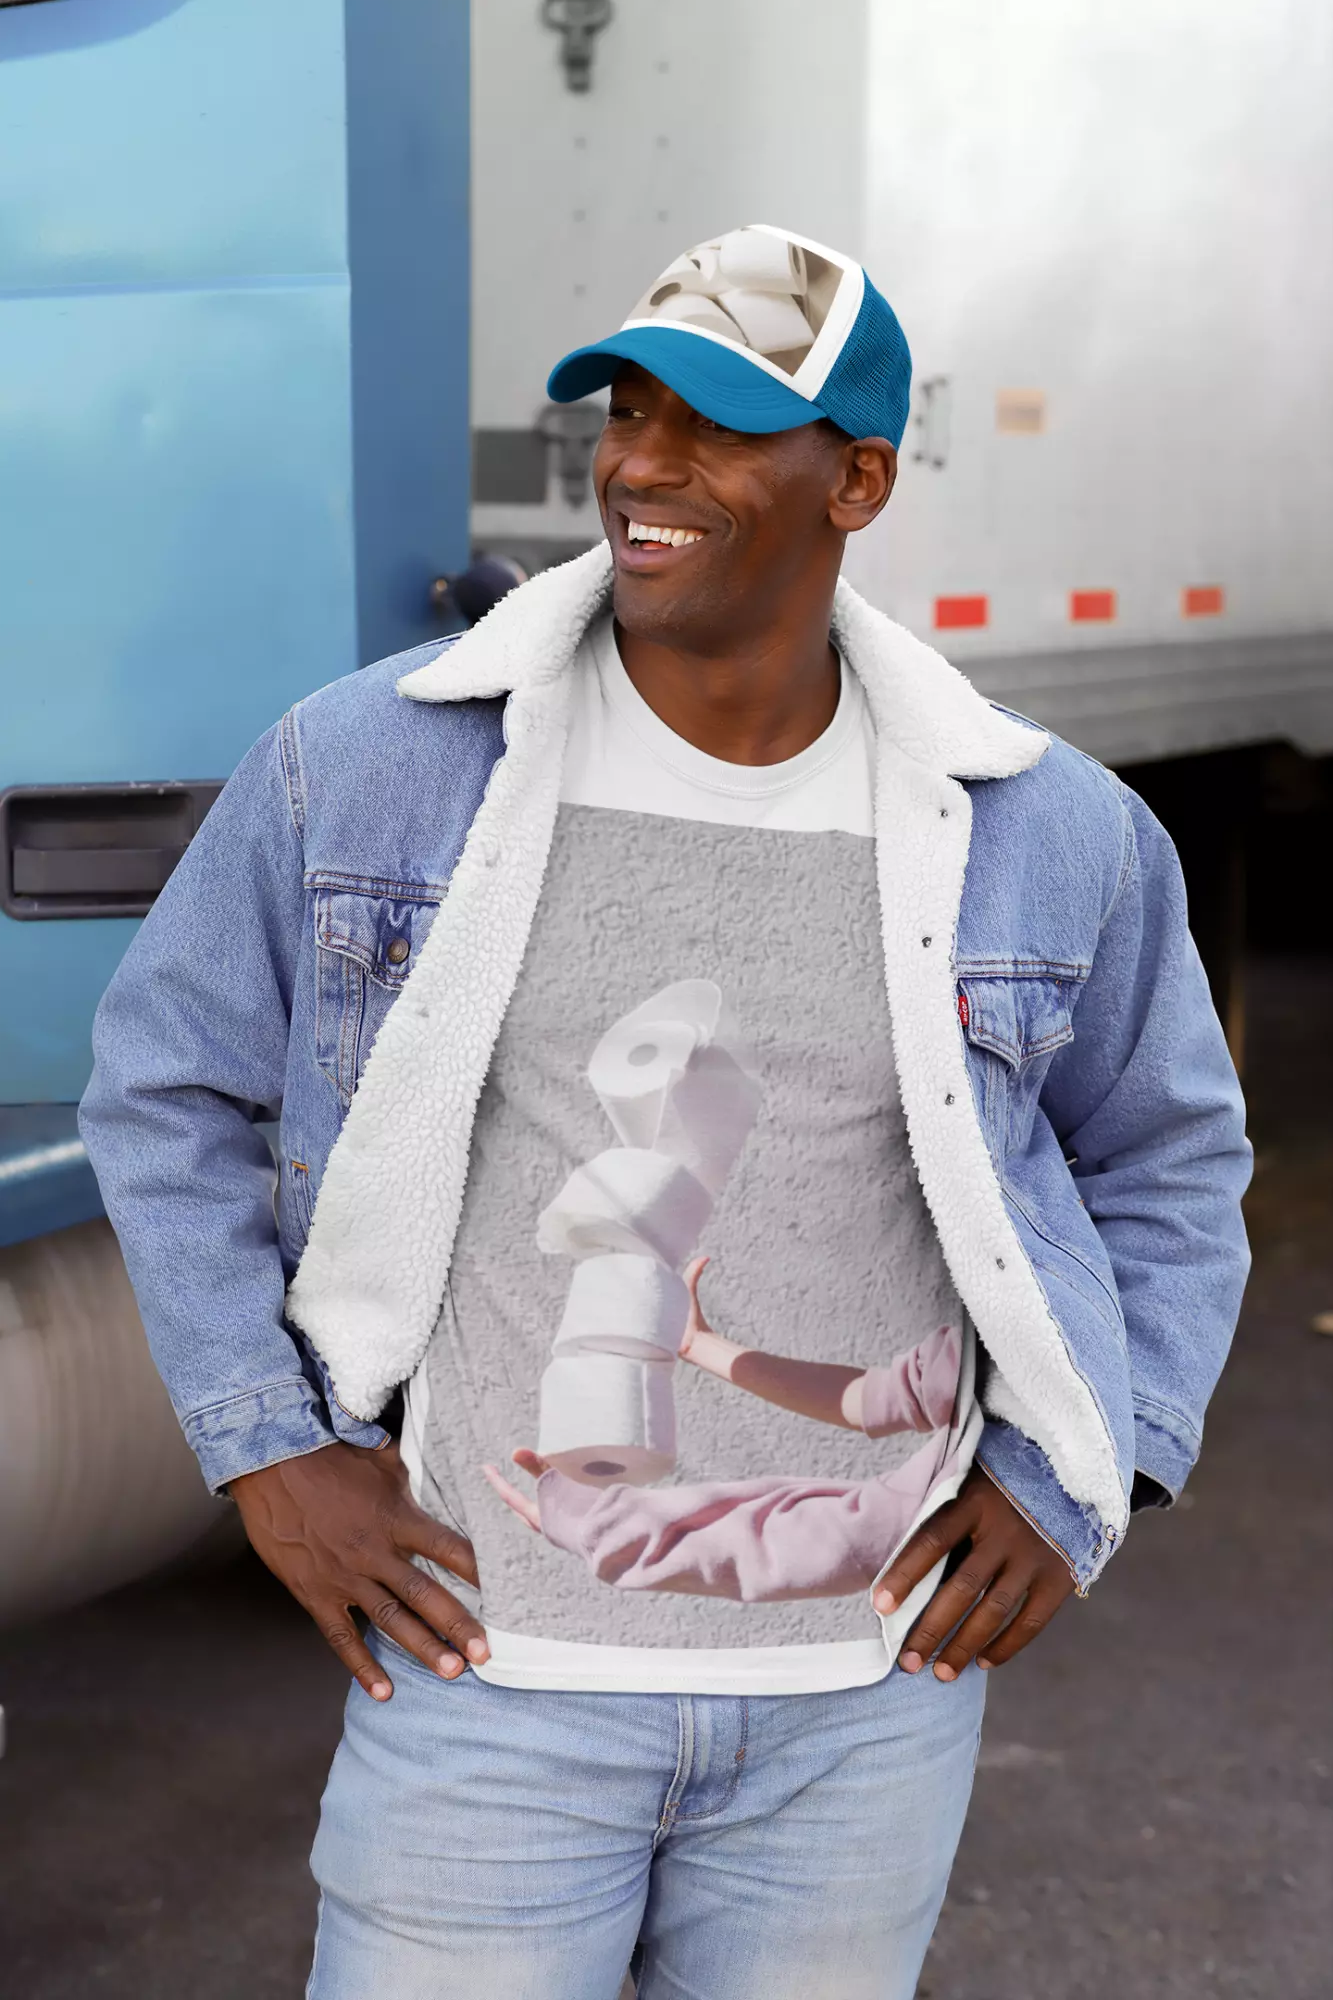 Mockup of a man with a customizable T-shirt and trucker hat on the street